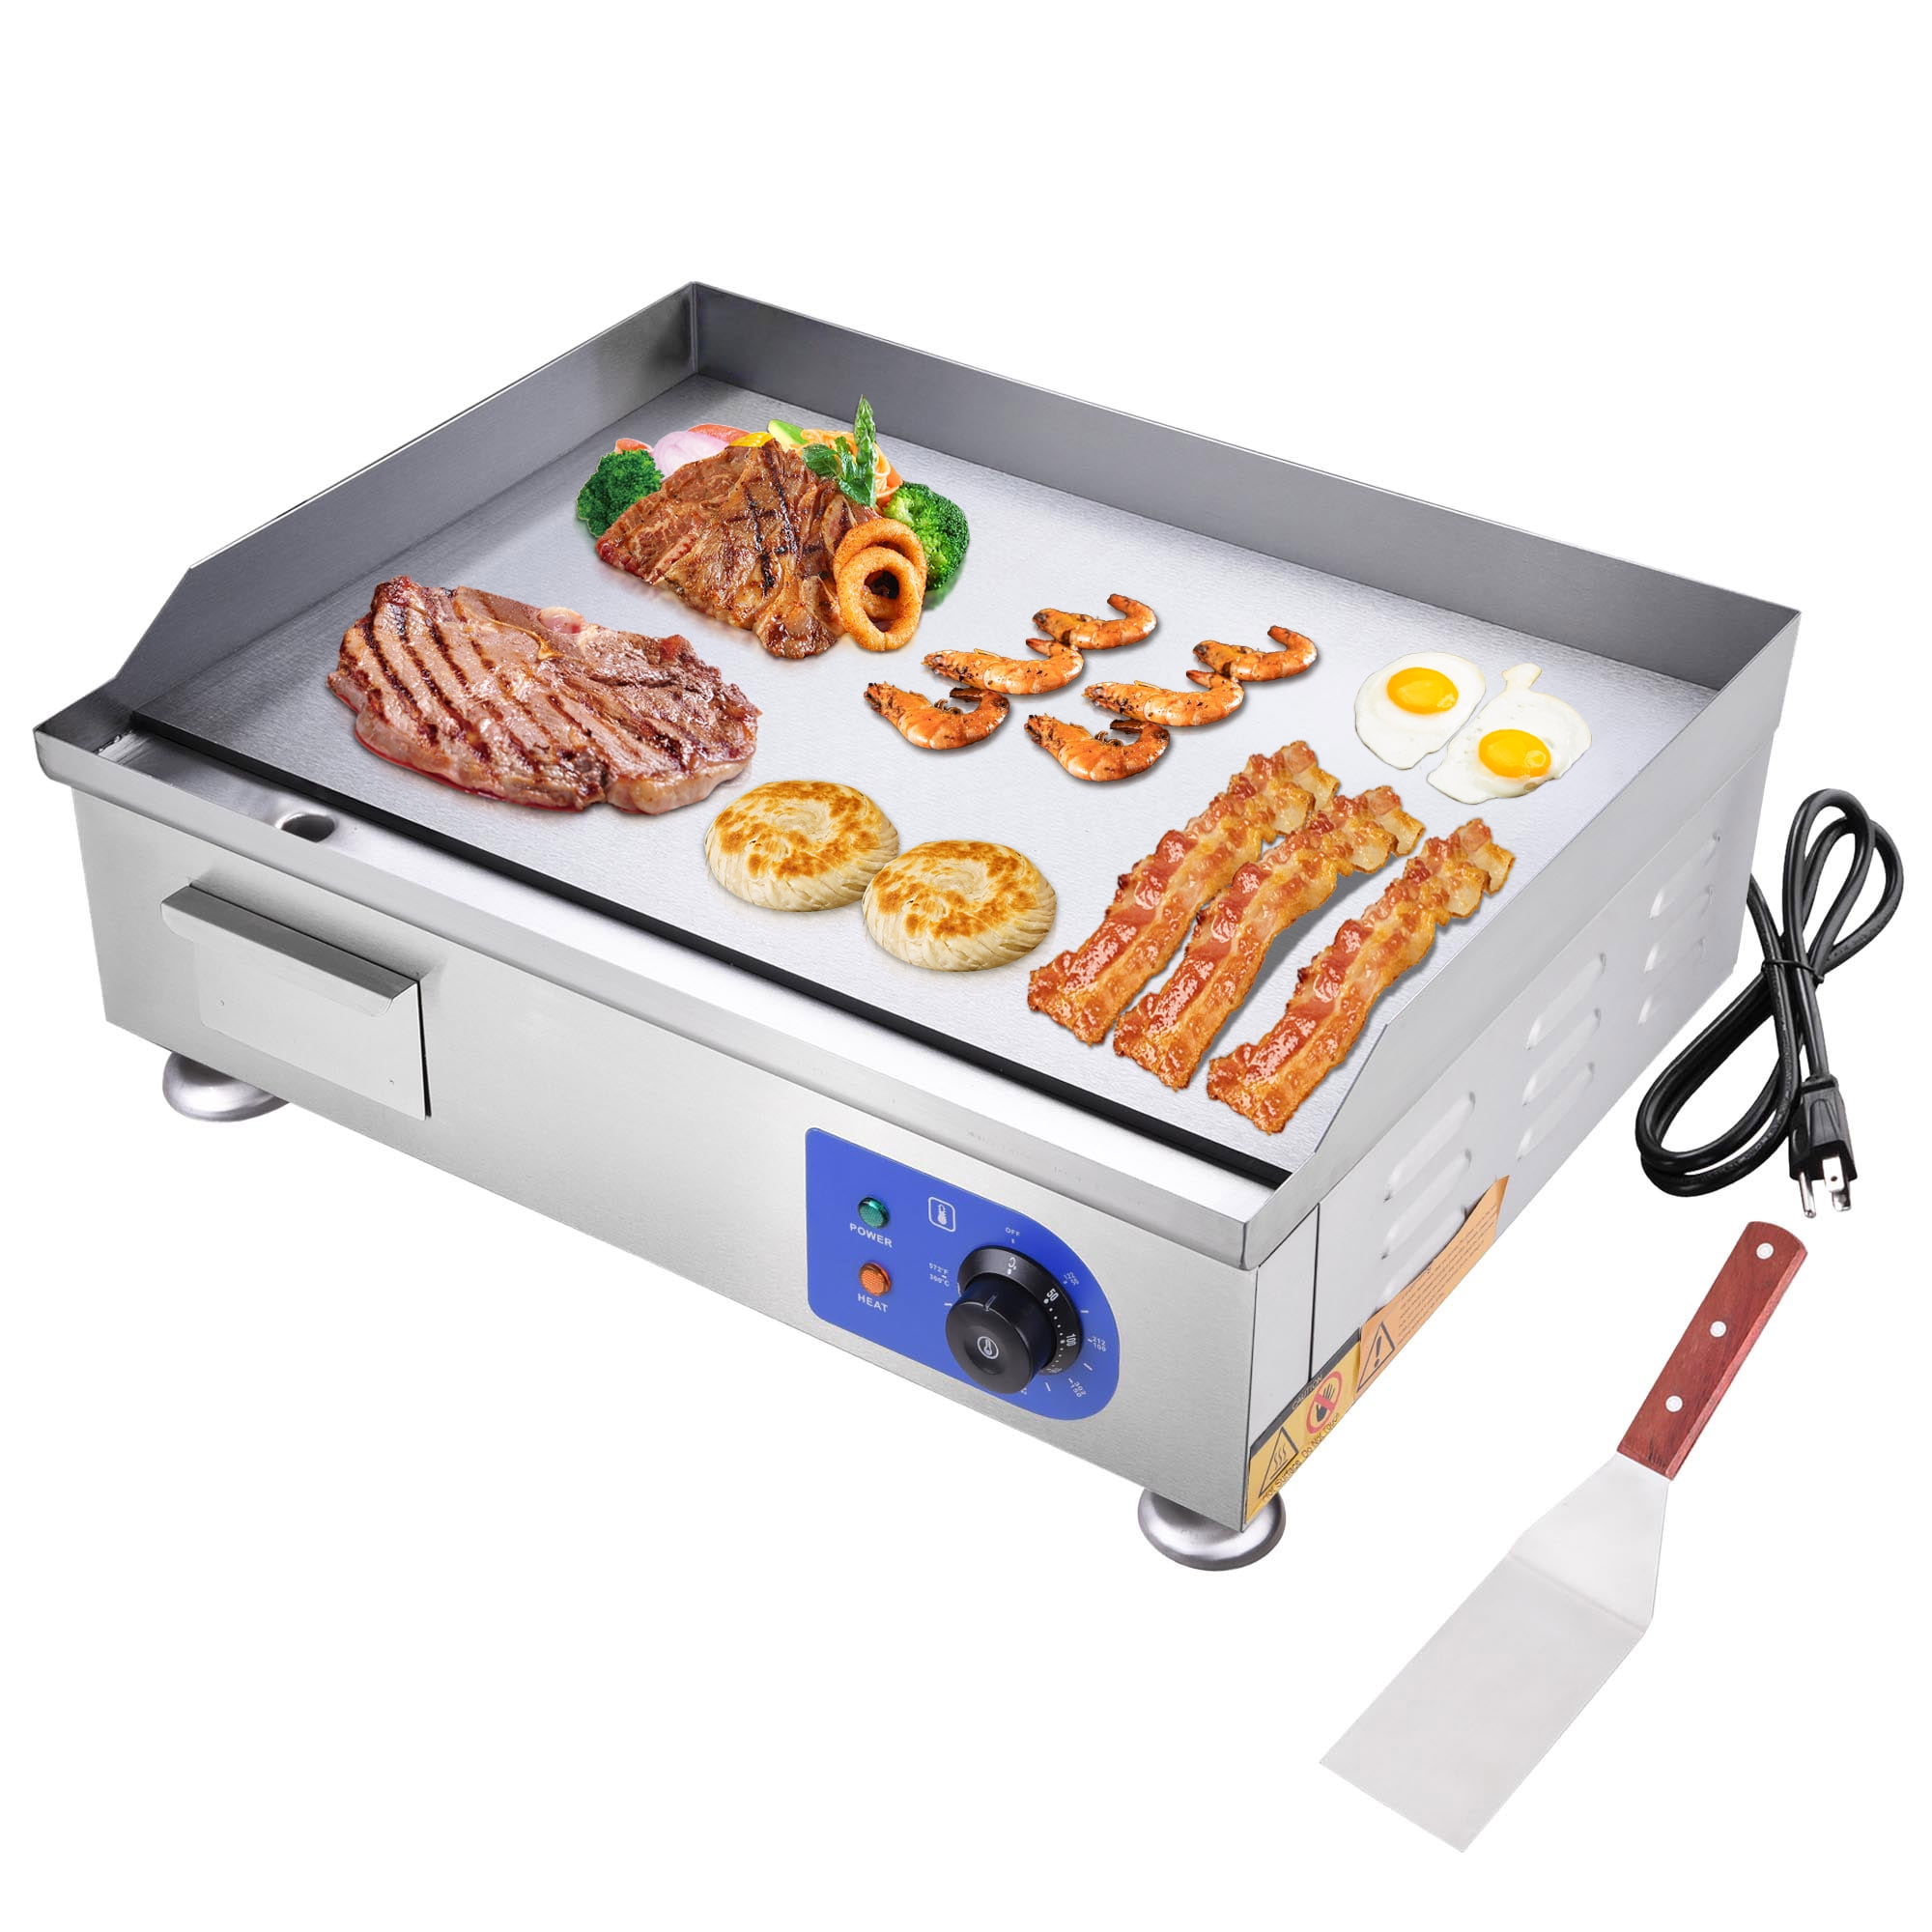 Presto Small Liddle Griddle Portable Kitchen Counter Grill Electric Cooking 